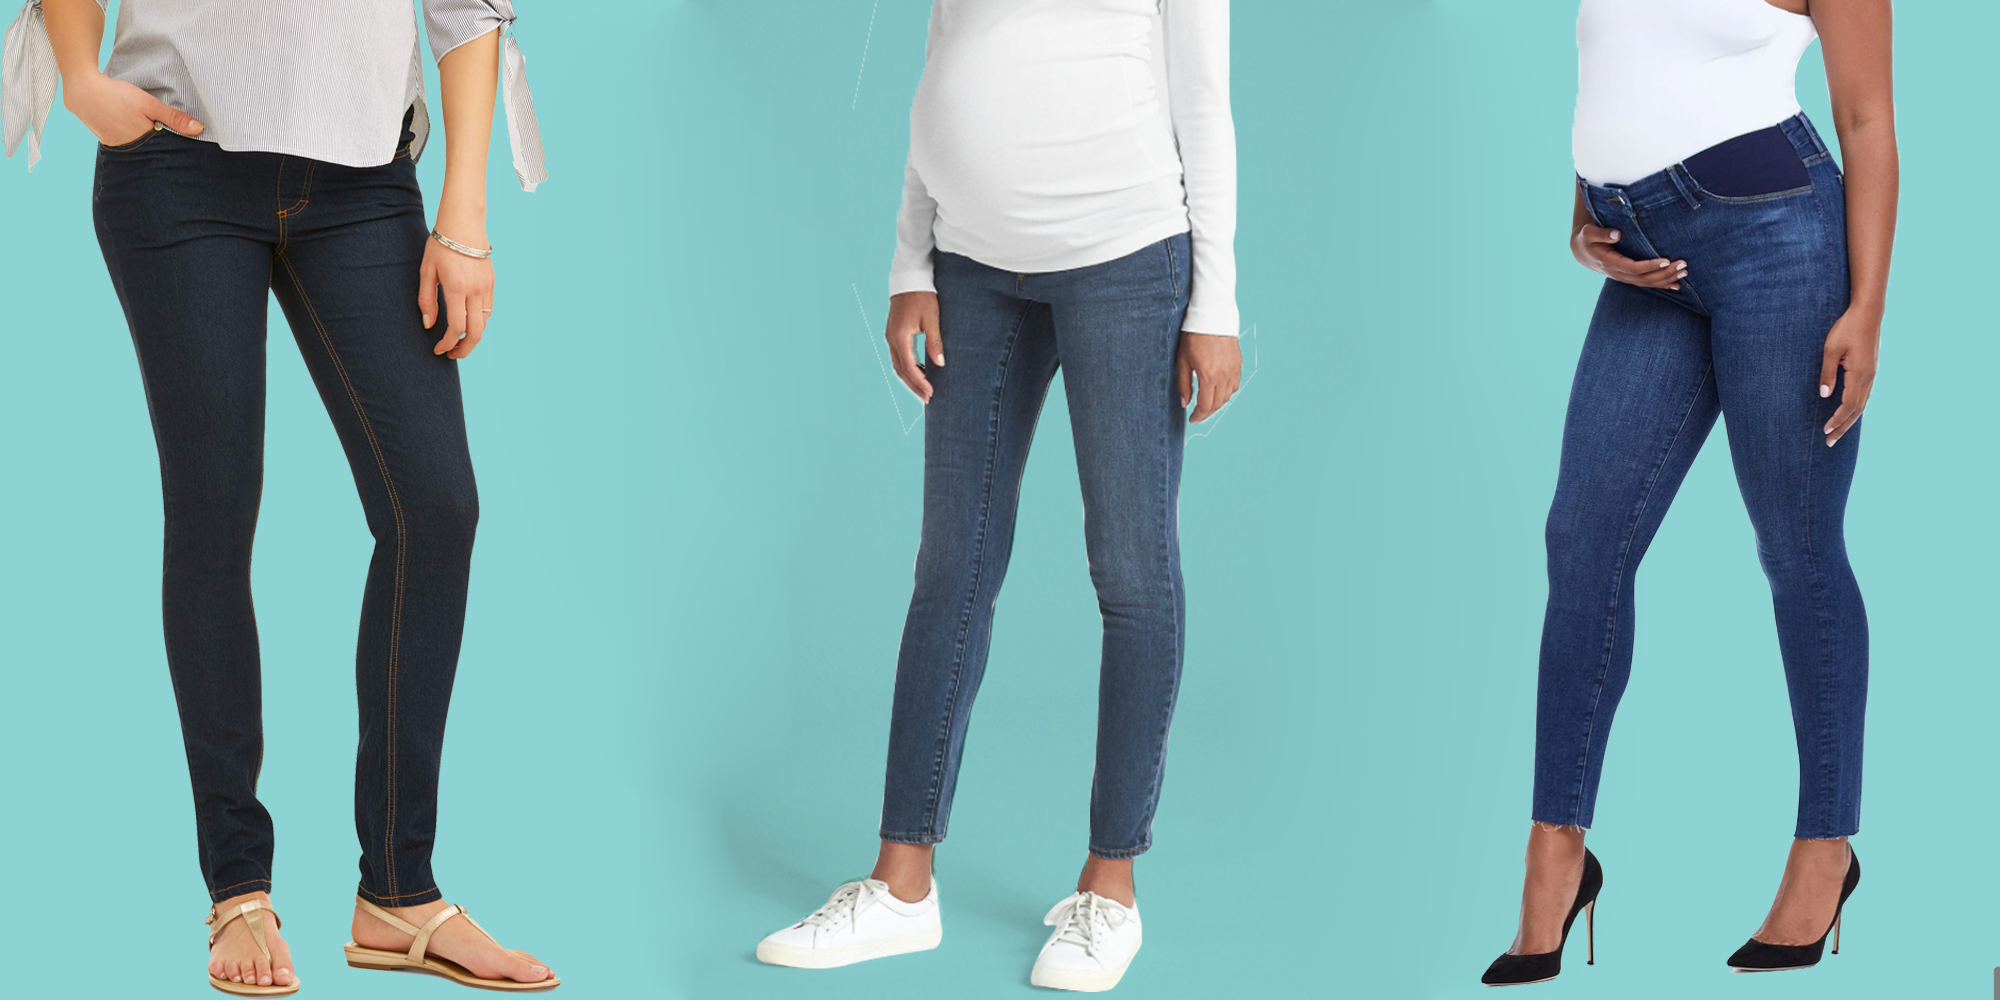 16 Best Maternity Jeans of 2022 - The Best Denim Styles for Pregnancy